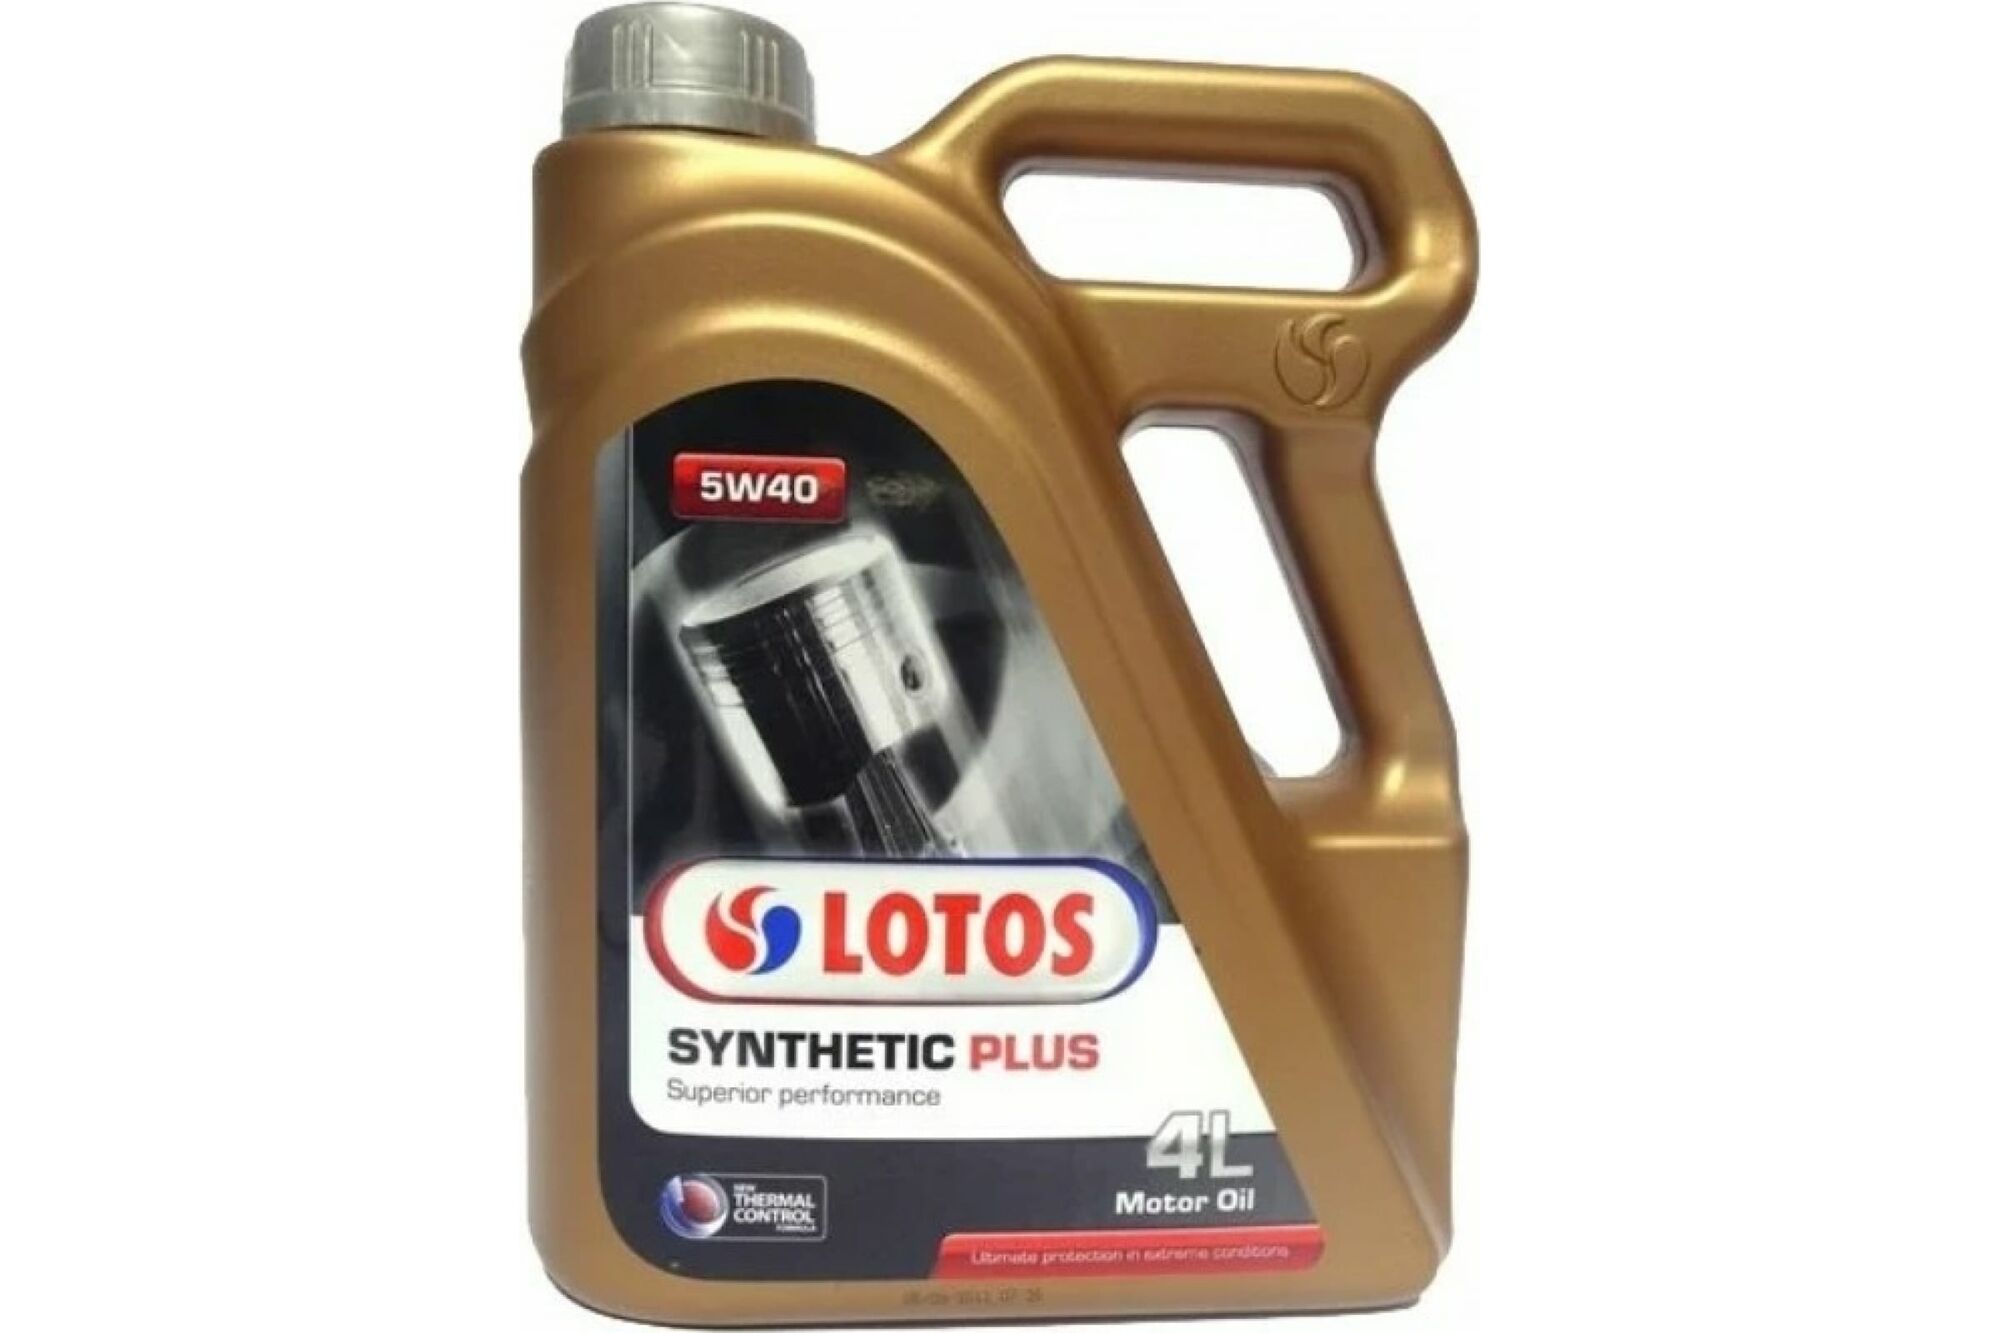 Моторное масло SYNTHETIC PLUS (4 л, 5W40, SN/CF) LOTOS WF-K402Y00-0H0